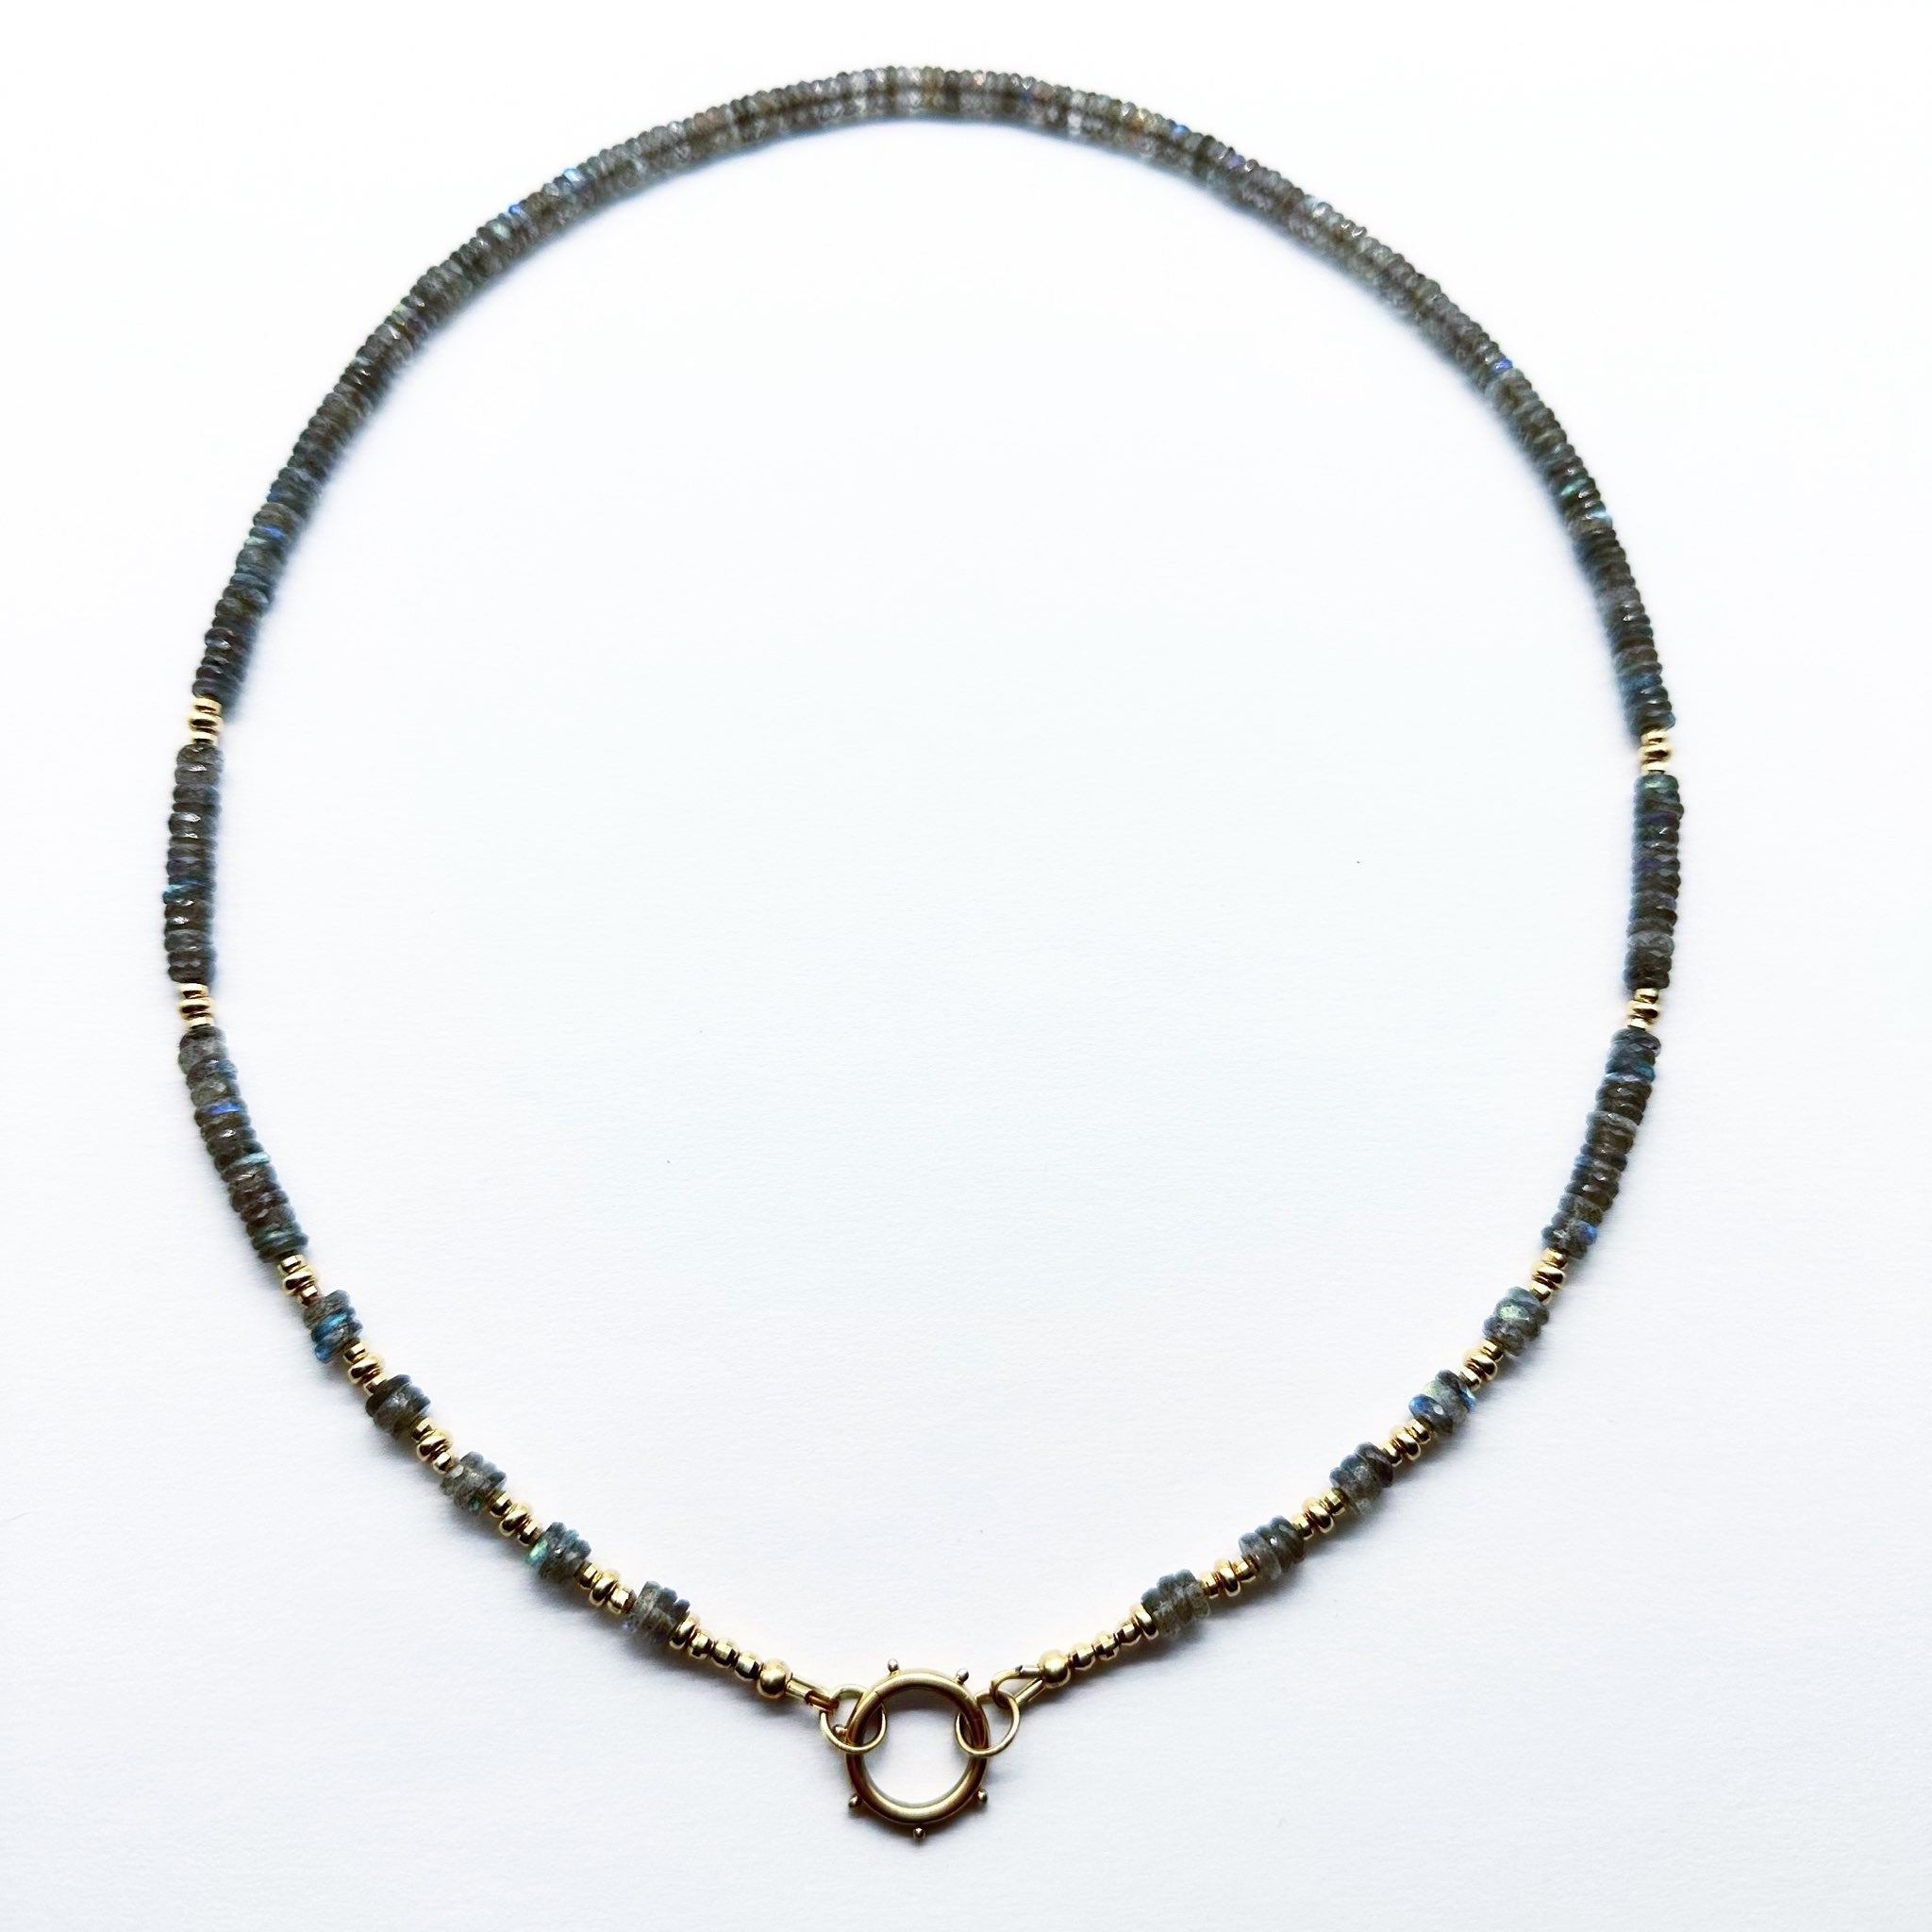 LABRADORITE NECKLACE WITH 14K GOLD AND CHARM HODLER